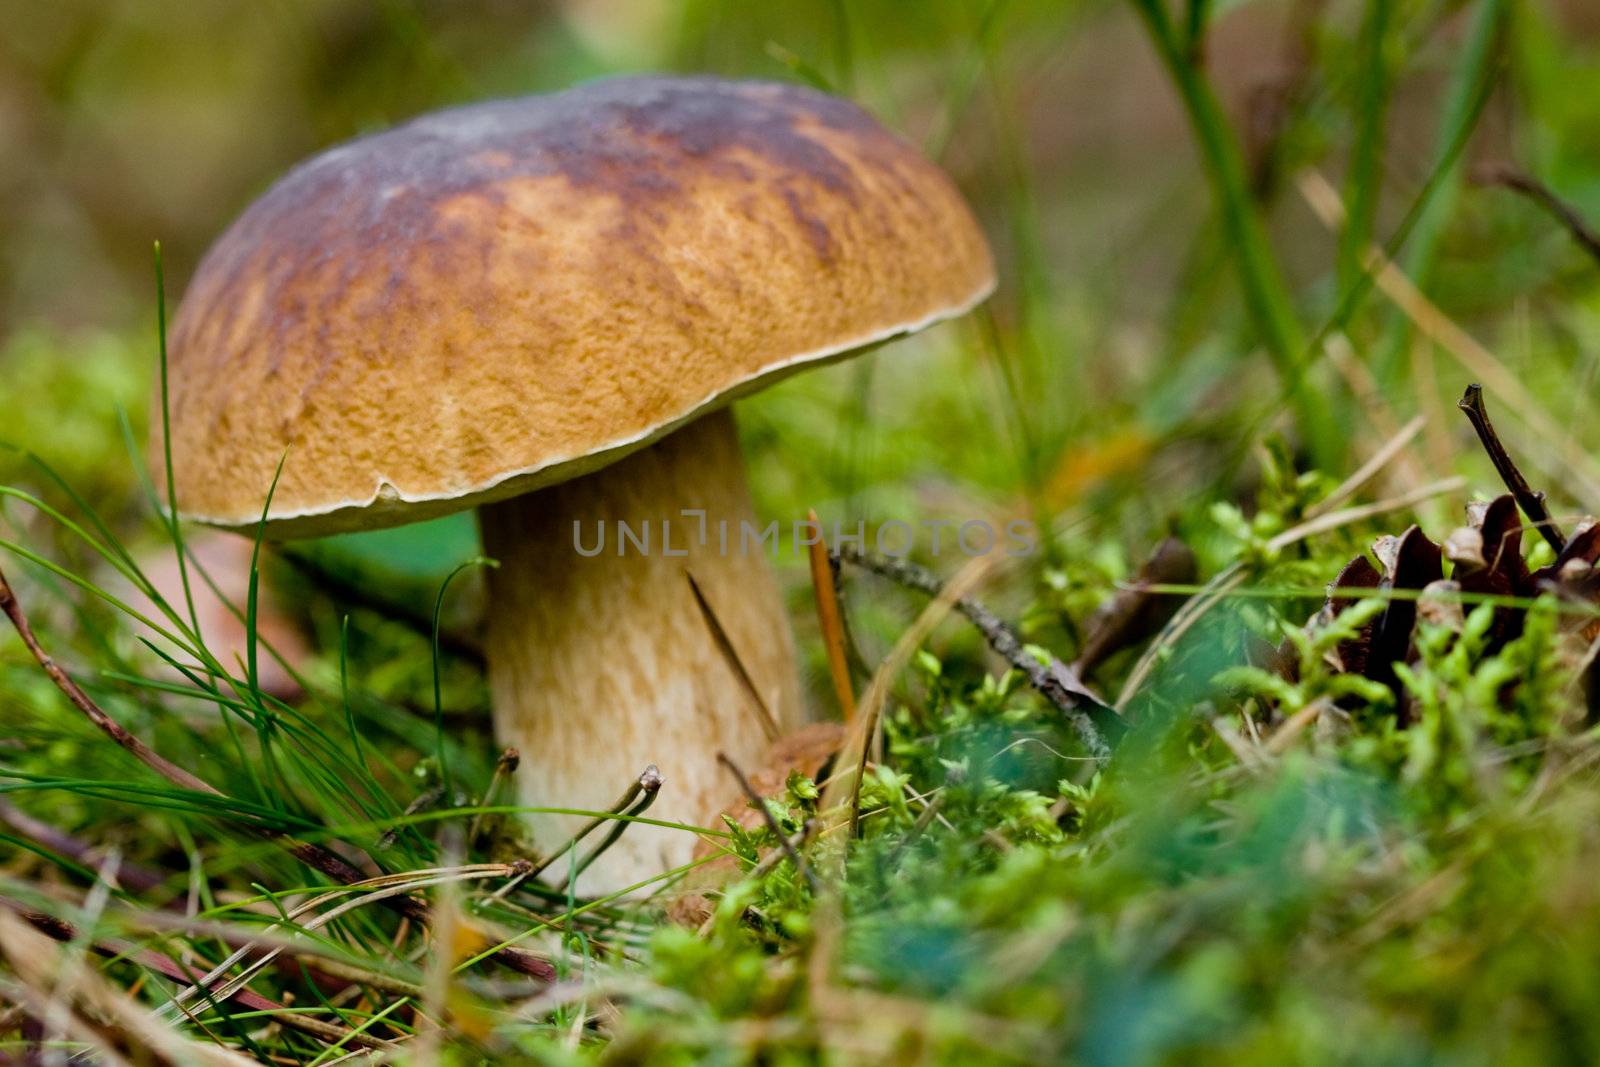 Boletus on the background of green grass in the wild